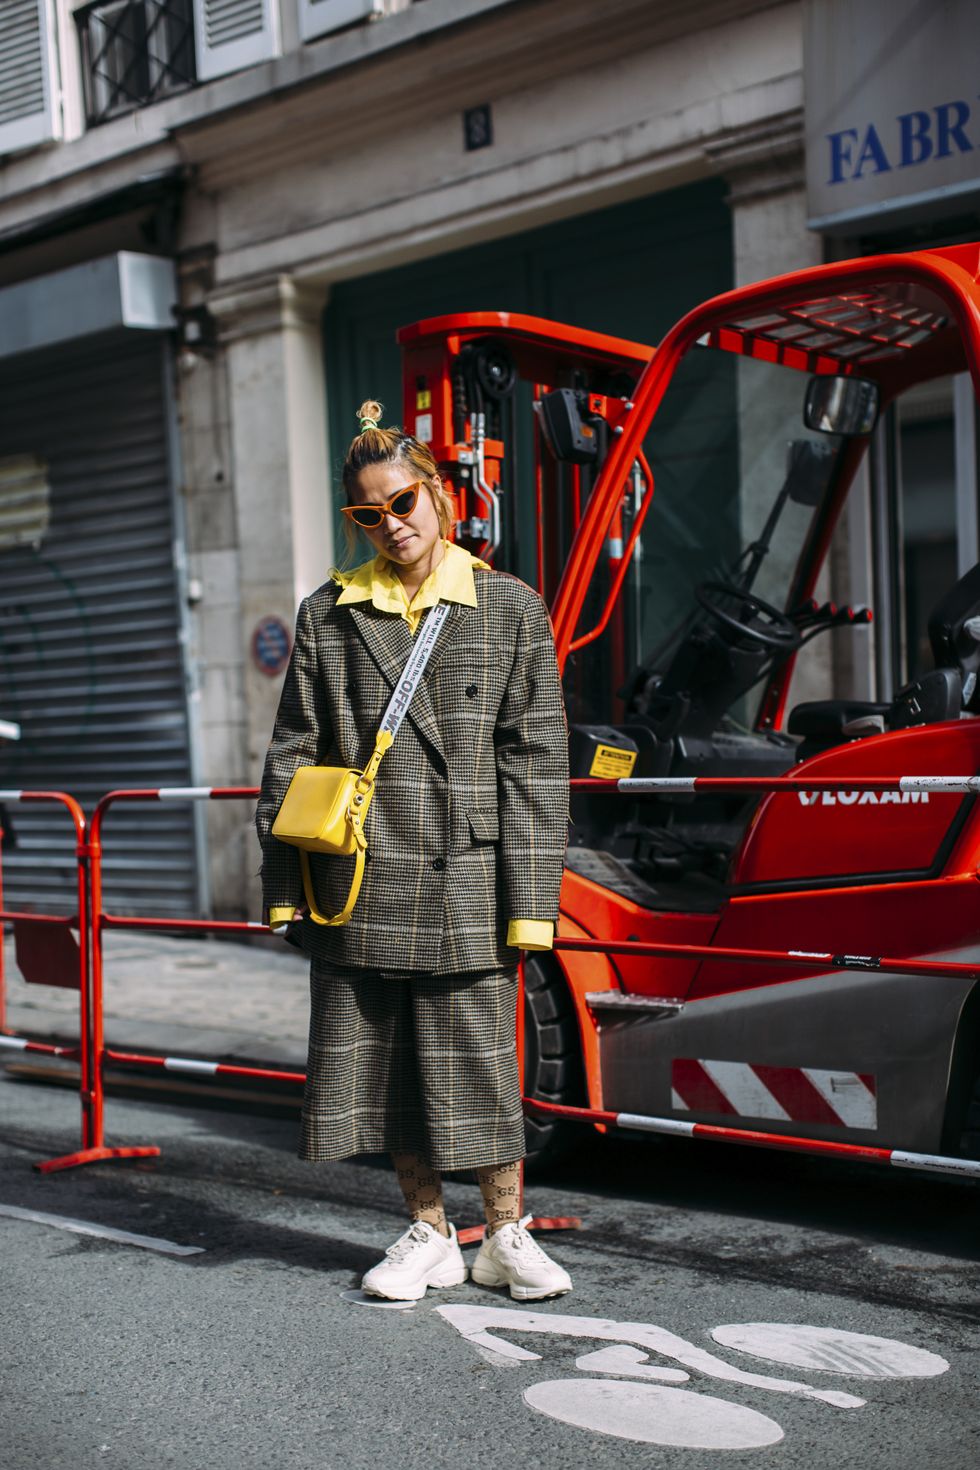 Red, Transport, Yellow, Mode of transport, Workwear, Street fashion, Vehicle, Design, Street, Personal protective equipment, 